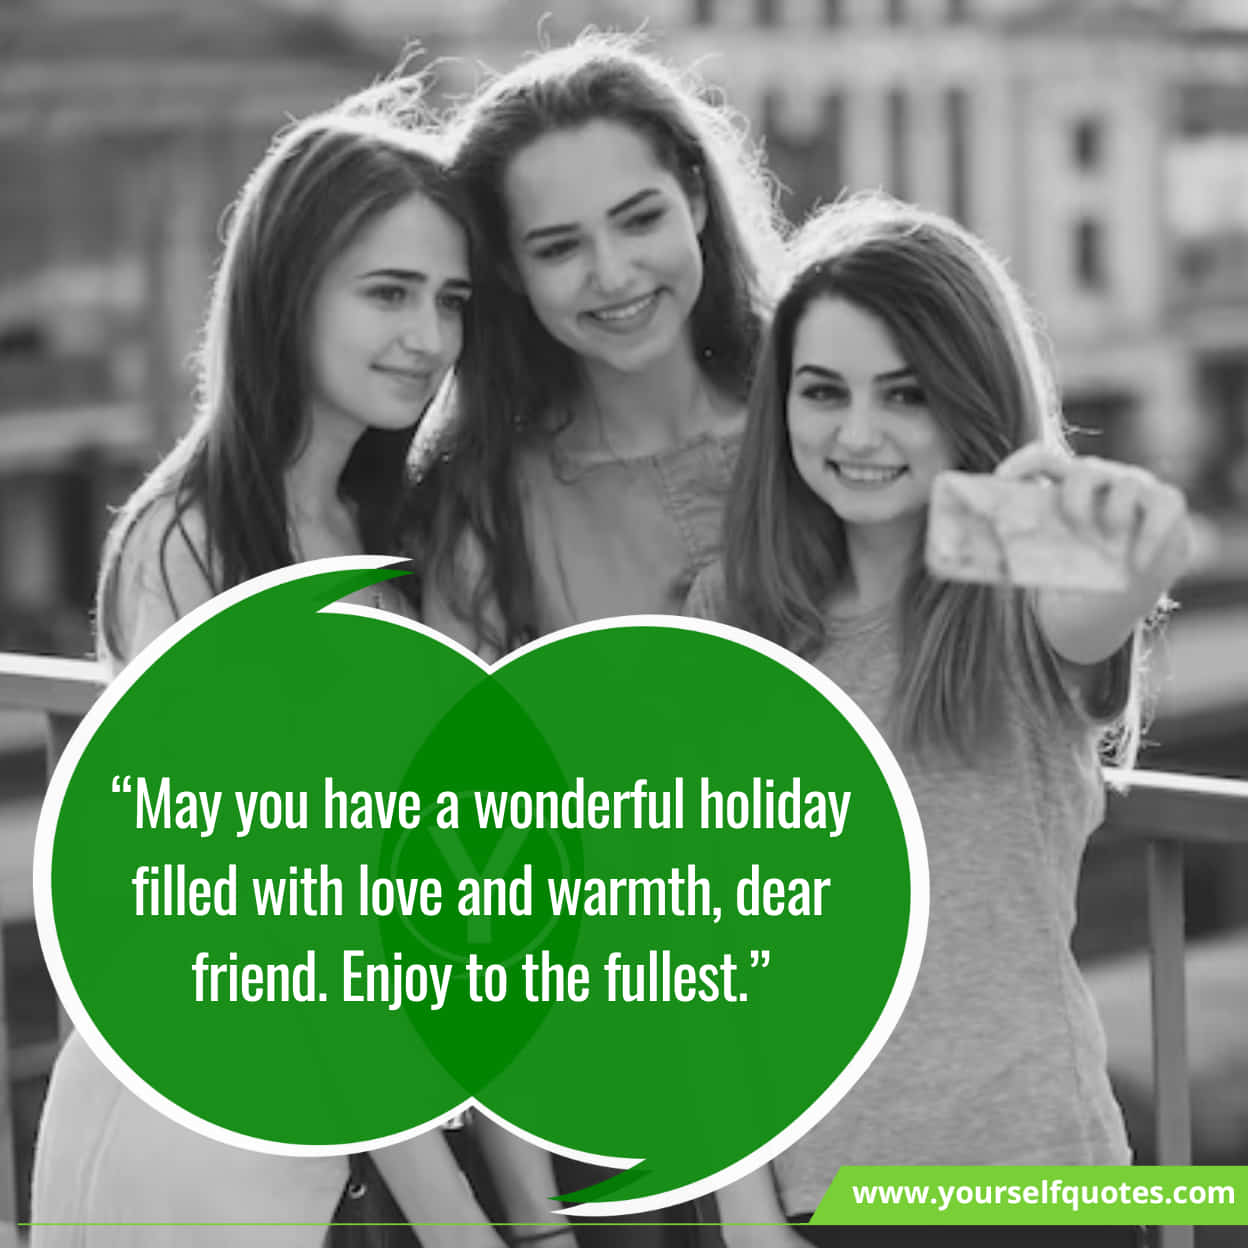 Holiday Funny Wishes About Friends